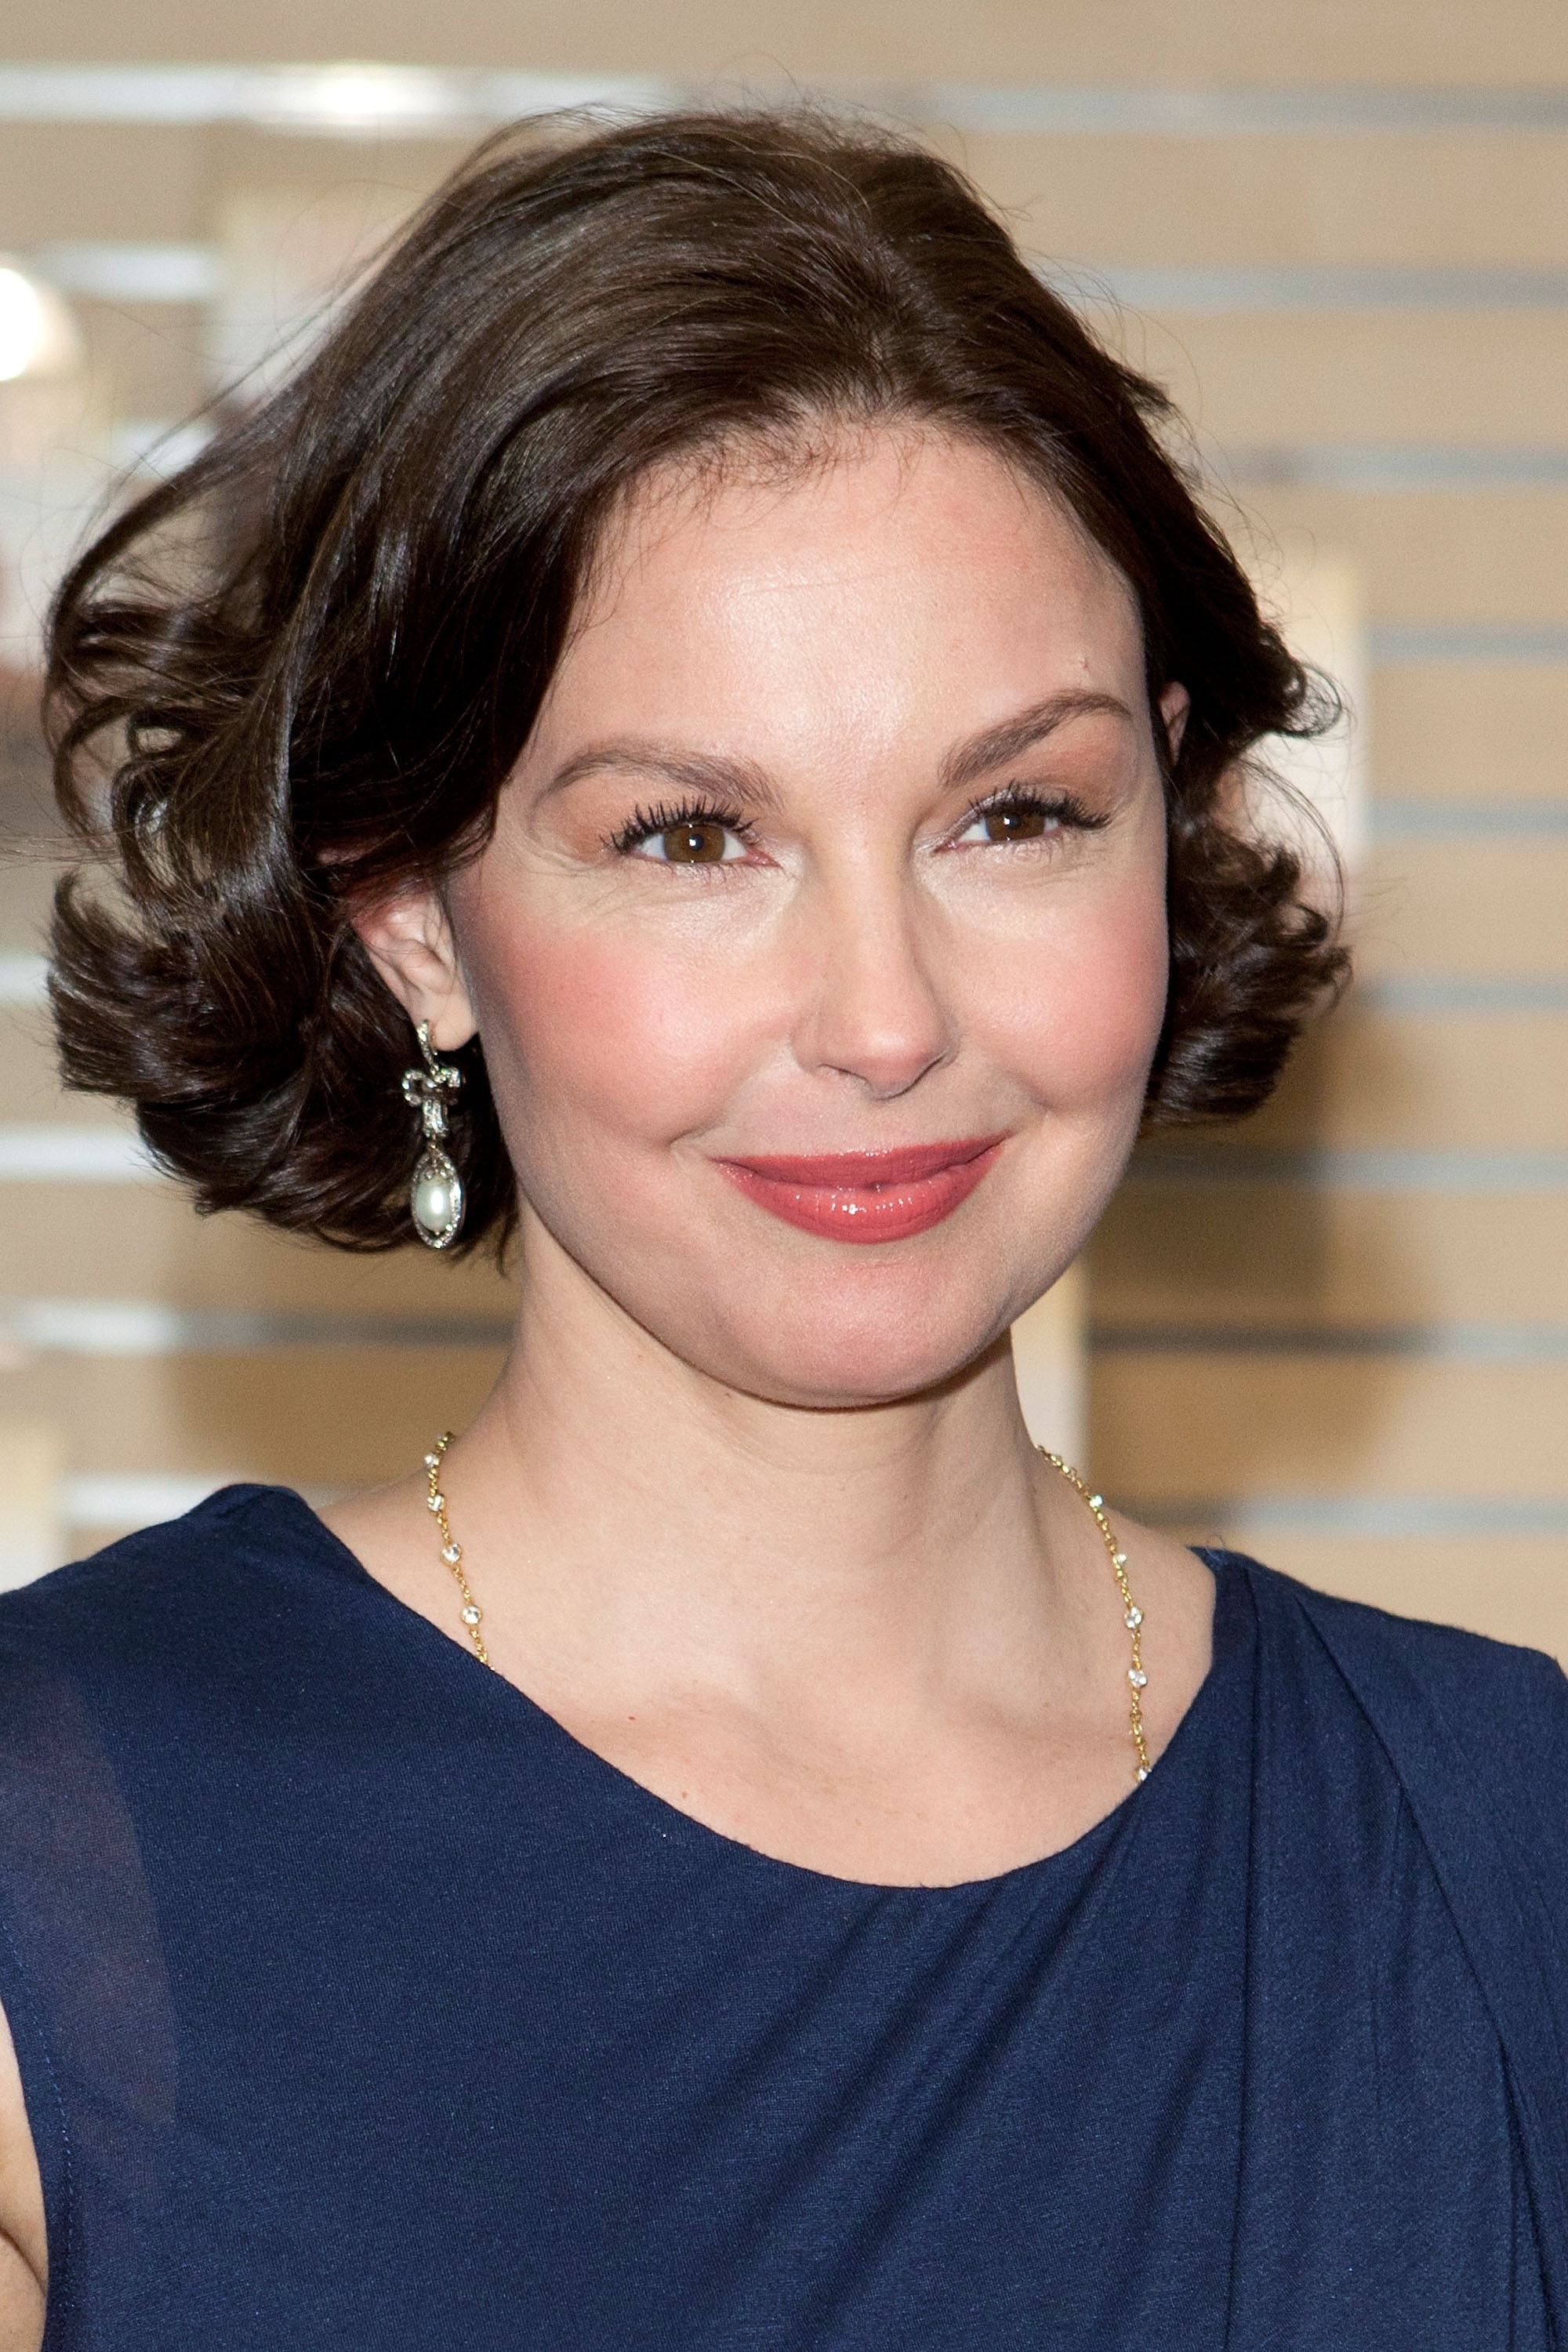 Ashley Judd Recalls the “Trauma” in Her Body and Soul After Leg Injury